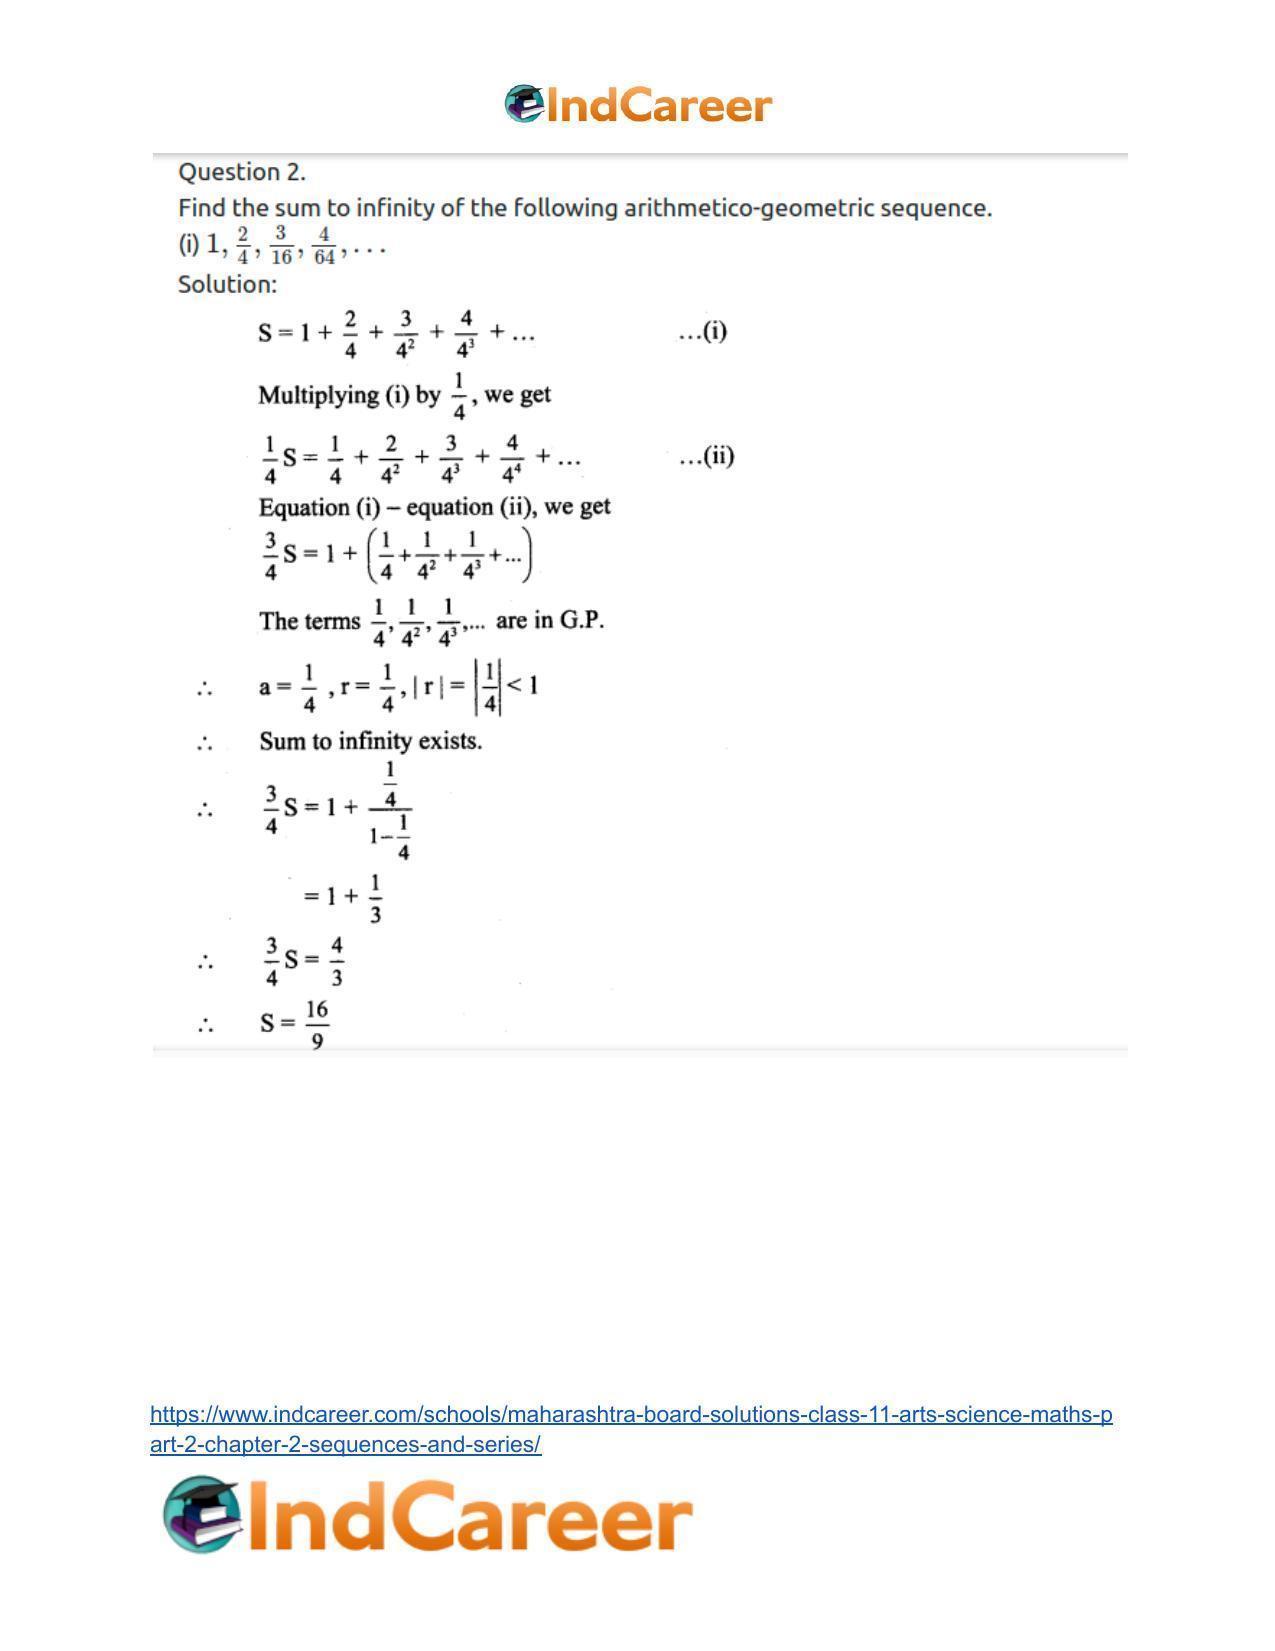 Maharashtra Board Solutions Class 11-Arts & Science Maths (Part 2): Chapter 2- Sequences and Series - Page 65